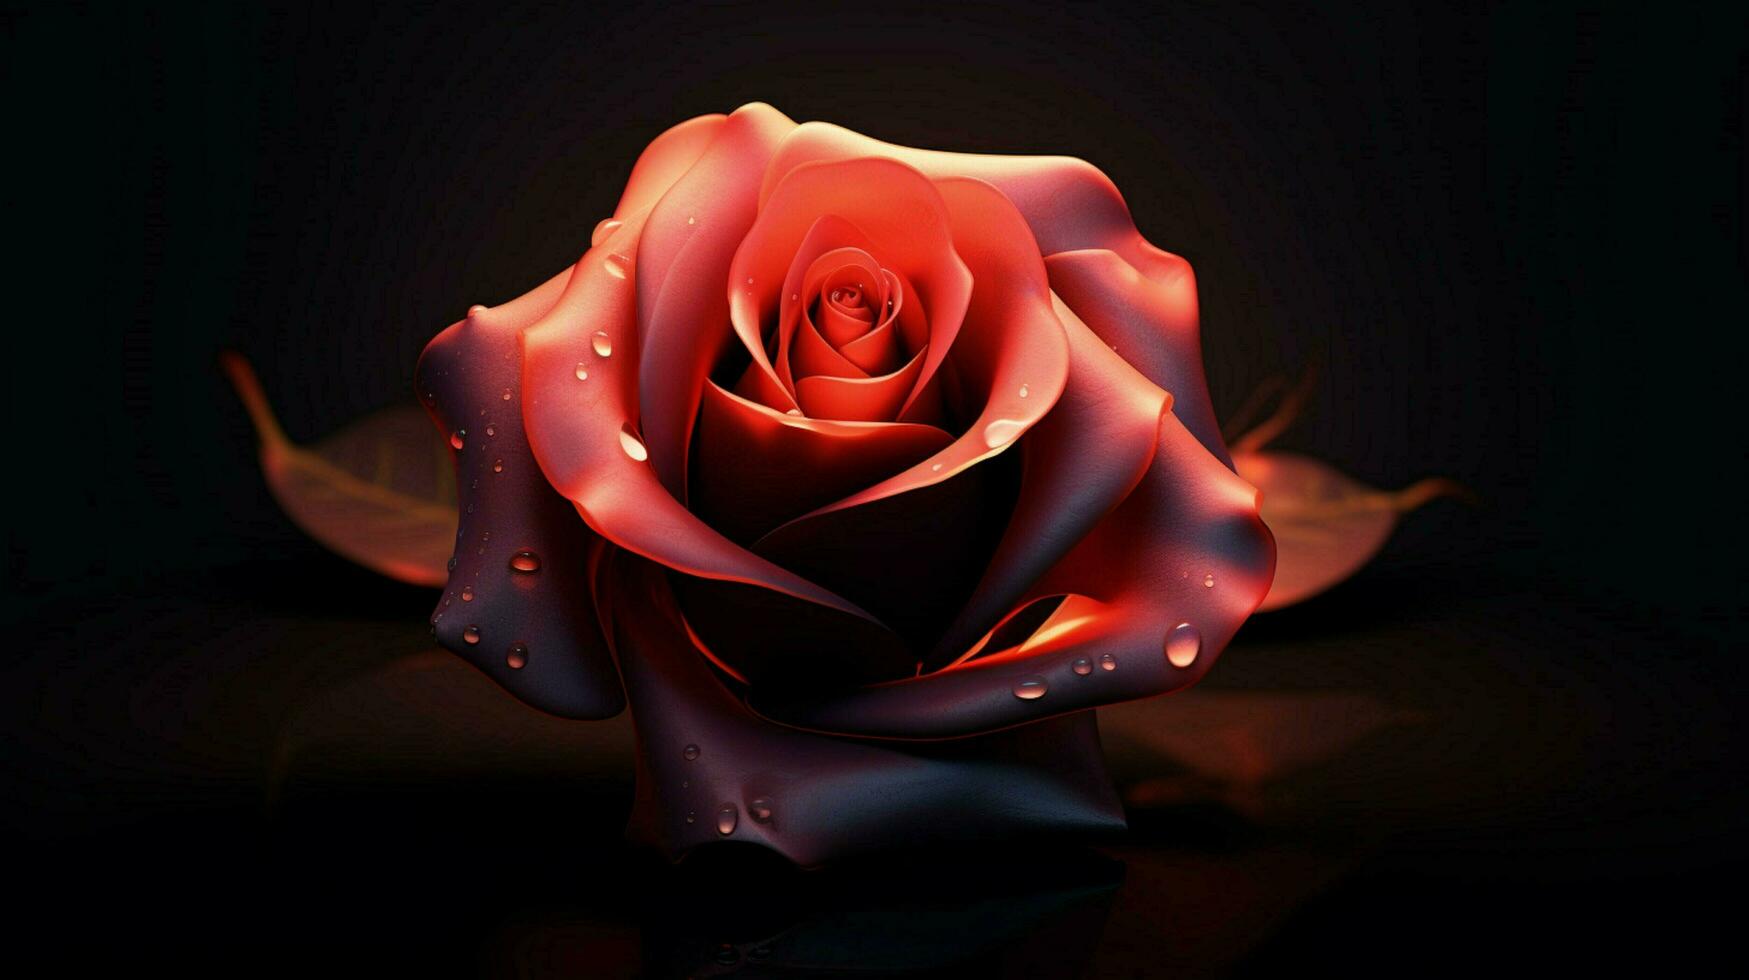 simple vectorial rose wallpaper black background photo